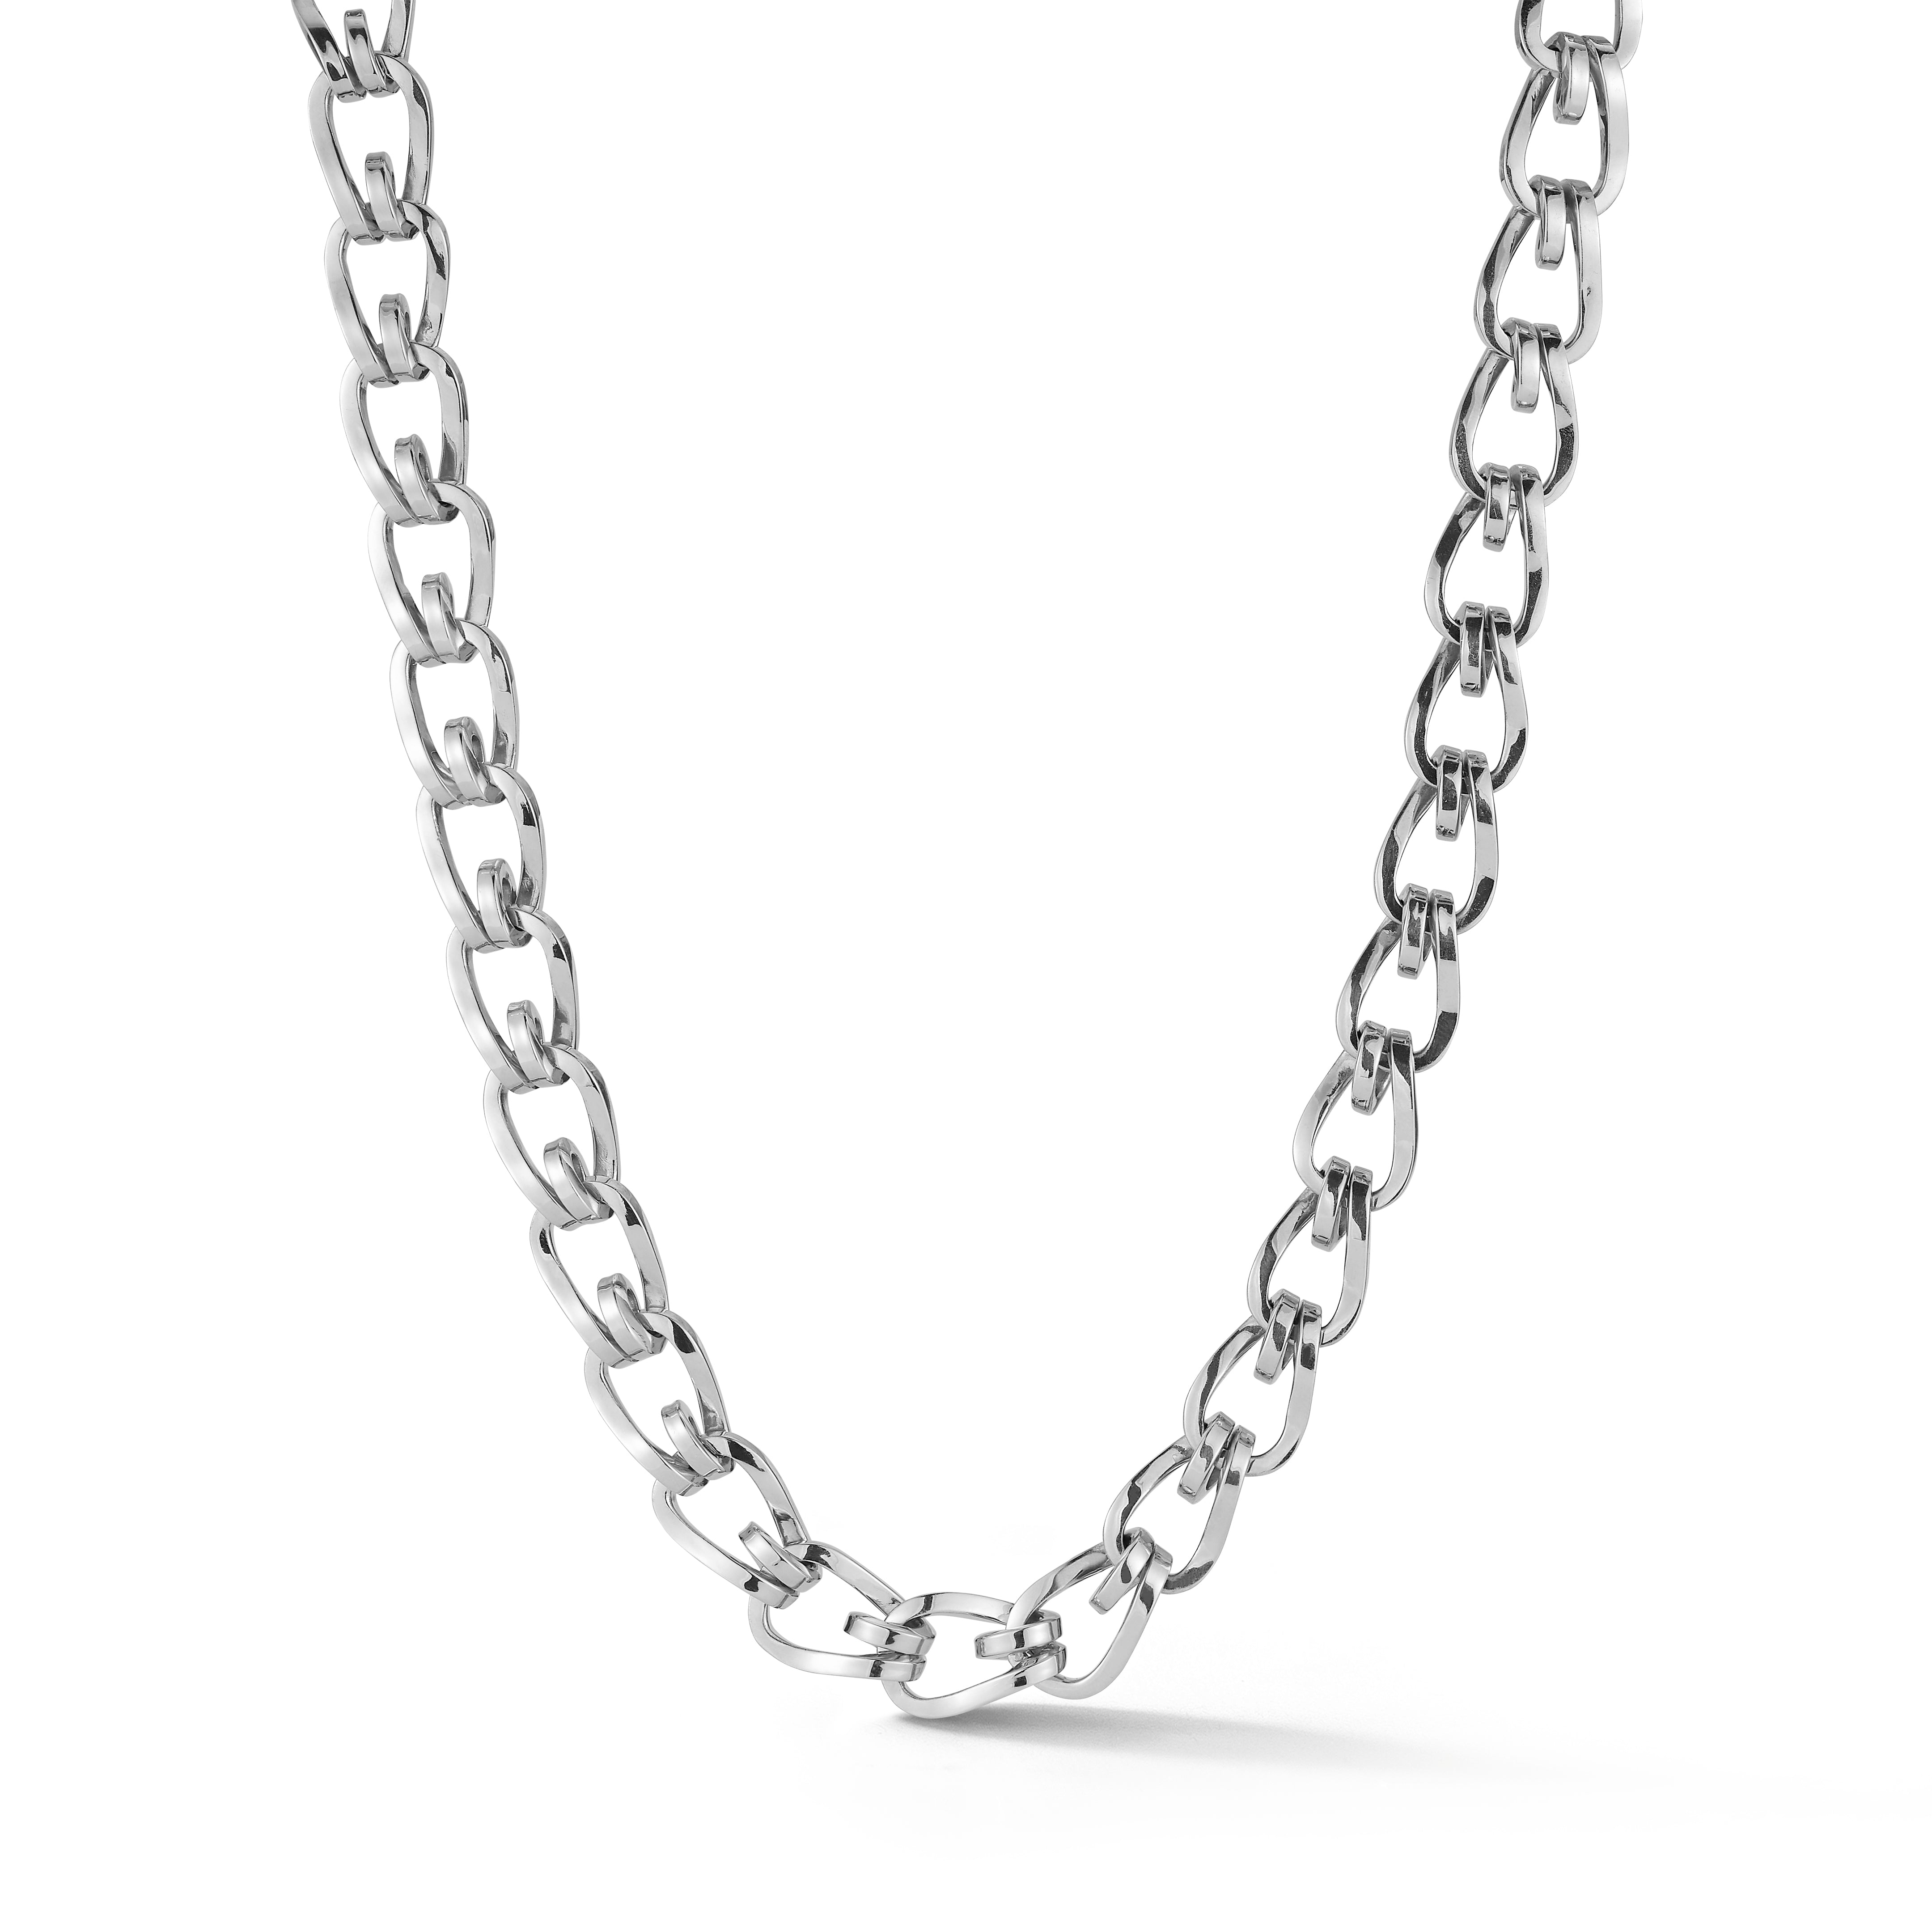 Small Daytona Chain Necklace in White Gold